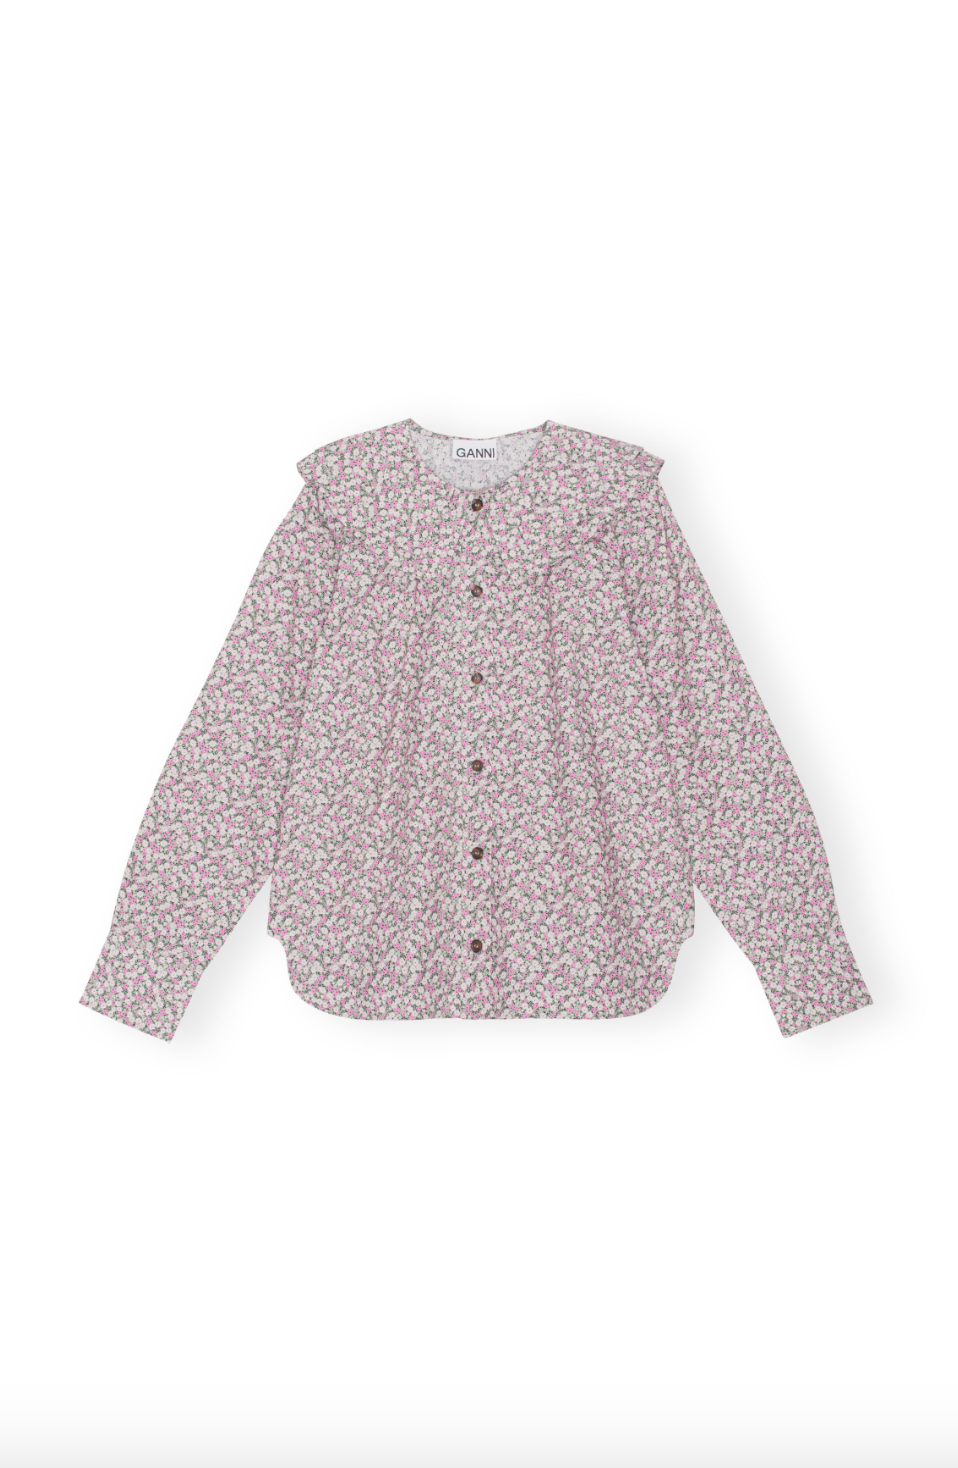 PRINTED COTTON DOUBLE-COLLAR SHIRT FROST GRAY